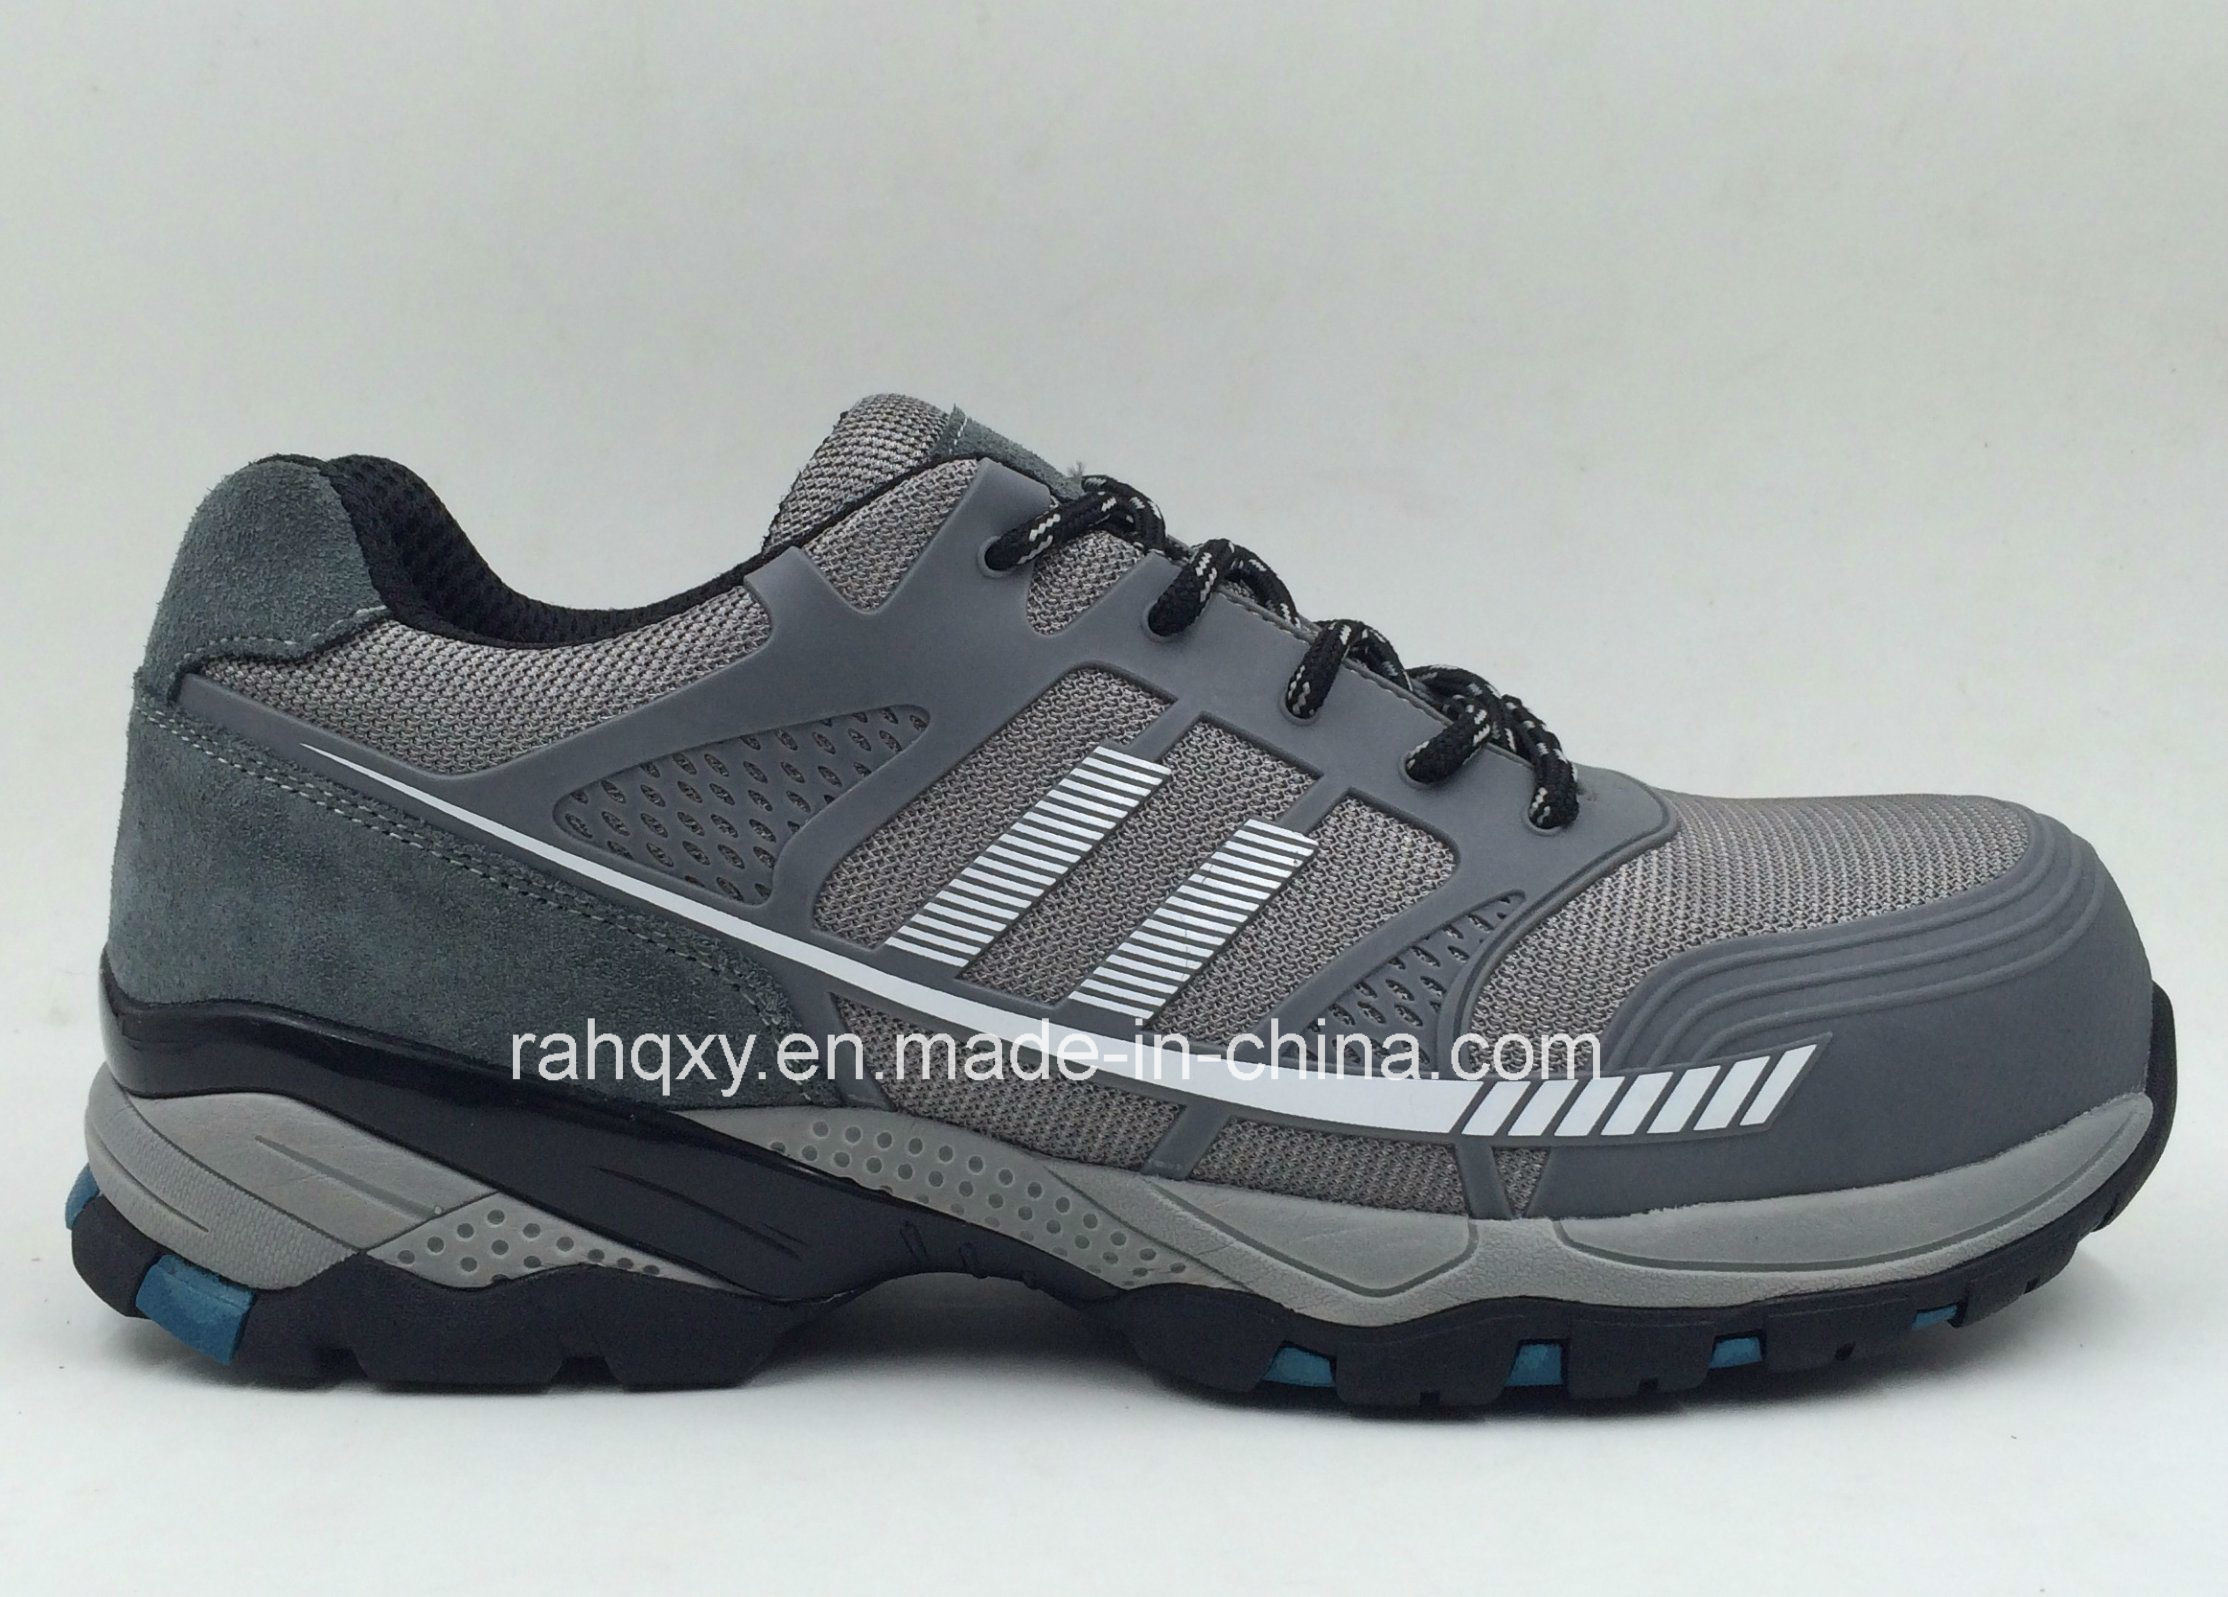 New Style Fashion Kpu Cement Safety Shoes (KP002)